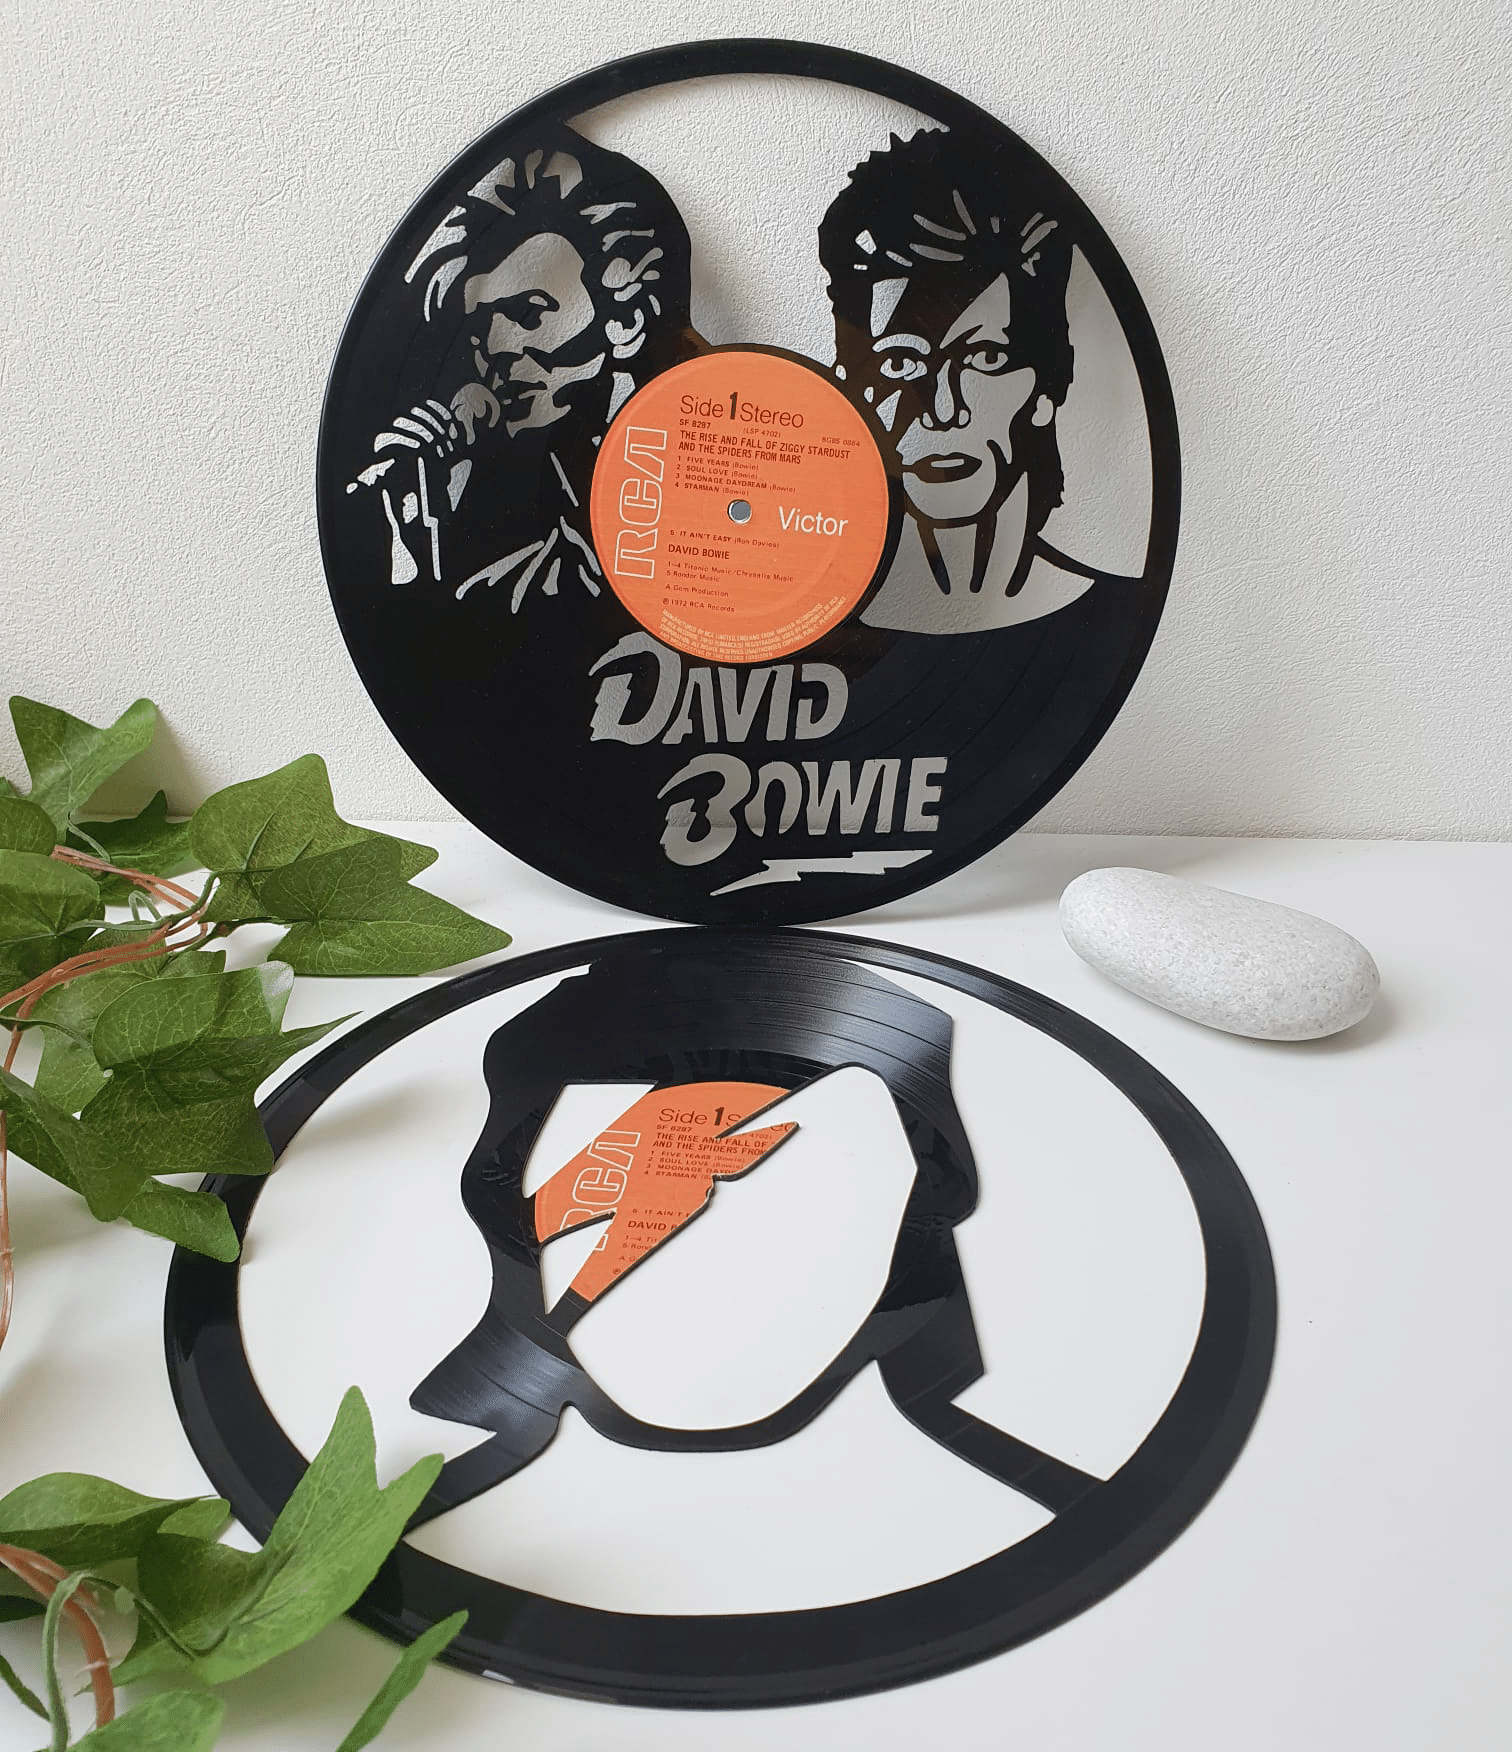 Off The Record: David Bowie